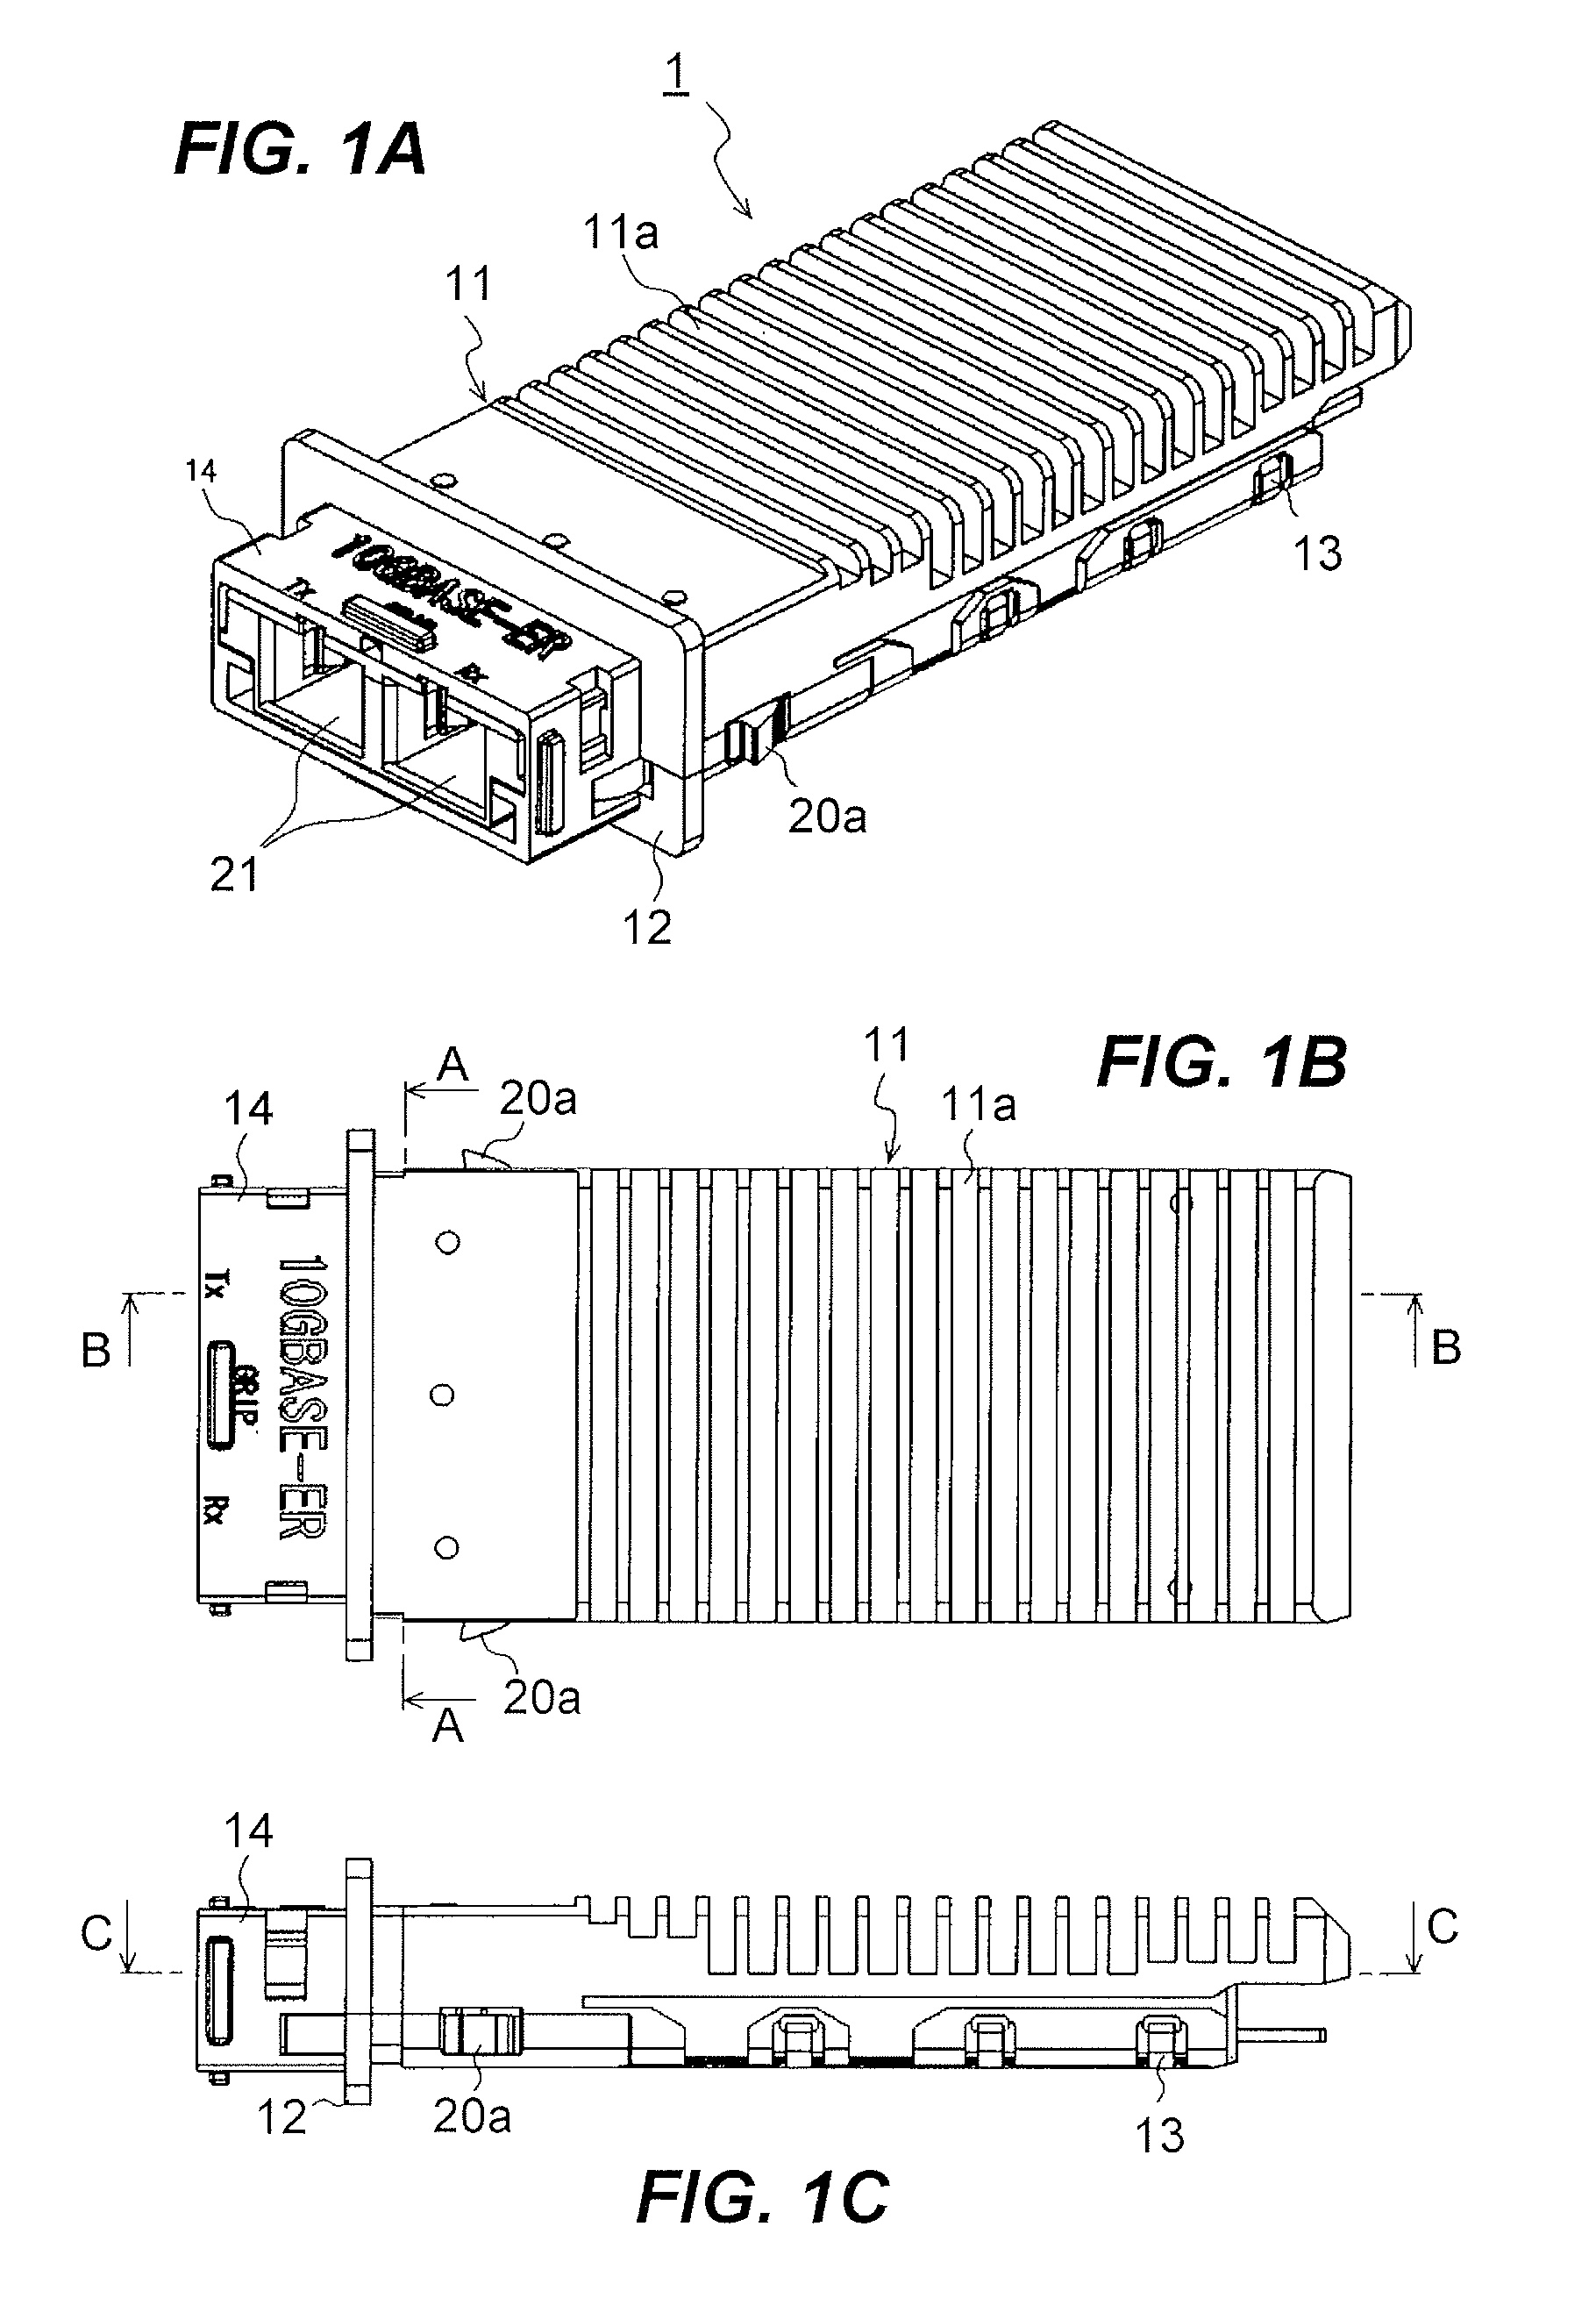 Optical transceiver with an optical sub-assembly supporter by a holder and a cover